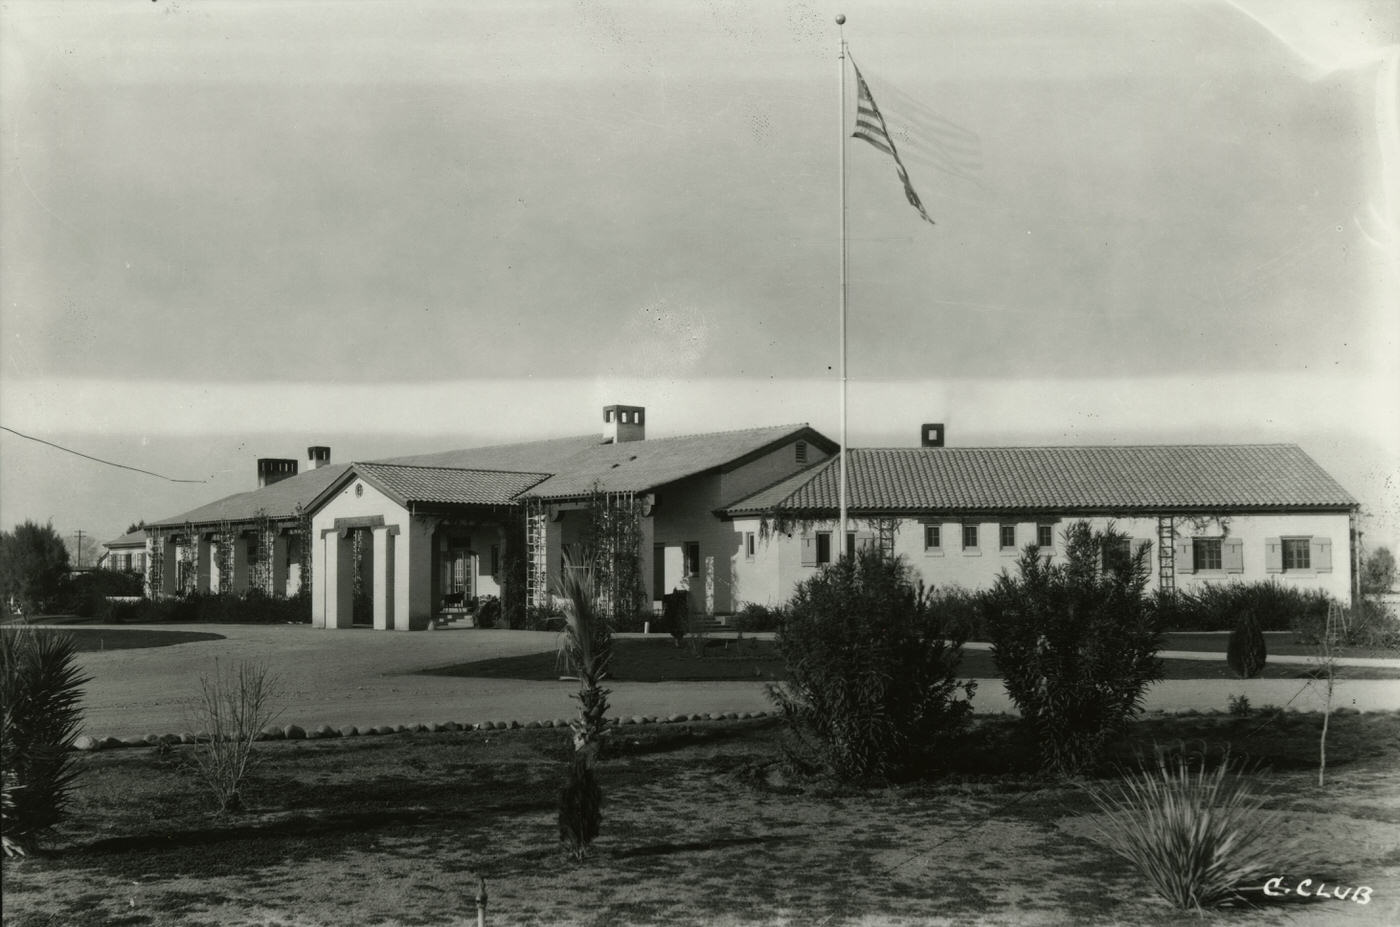 Phoenix Country Club Exterior, 1930s. This Club was located at Seventh St. and Thomas Rd. in Phoenix